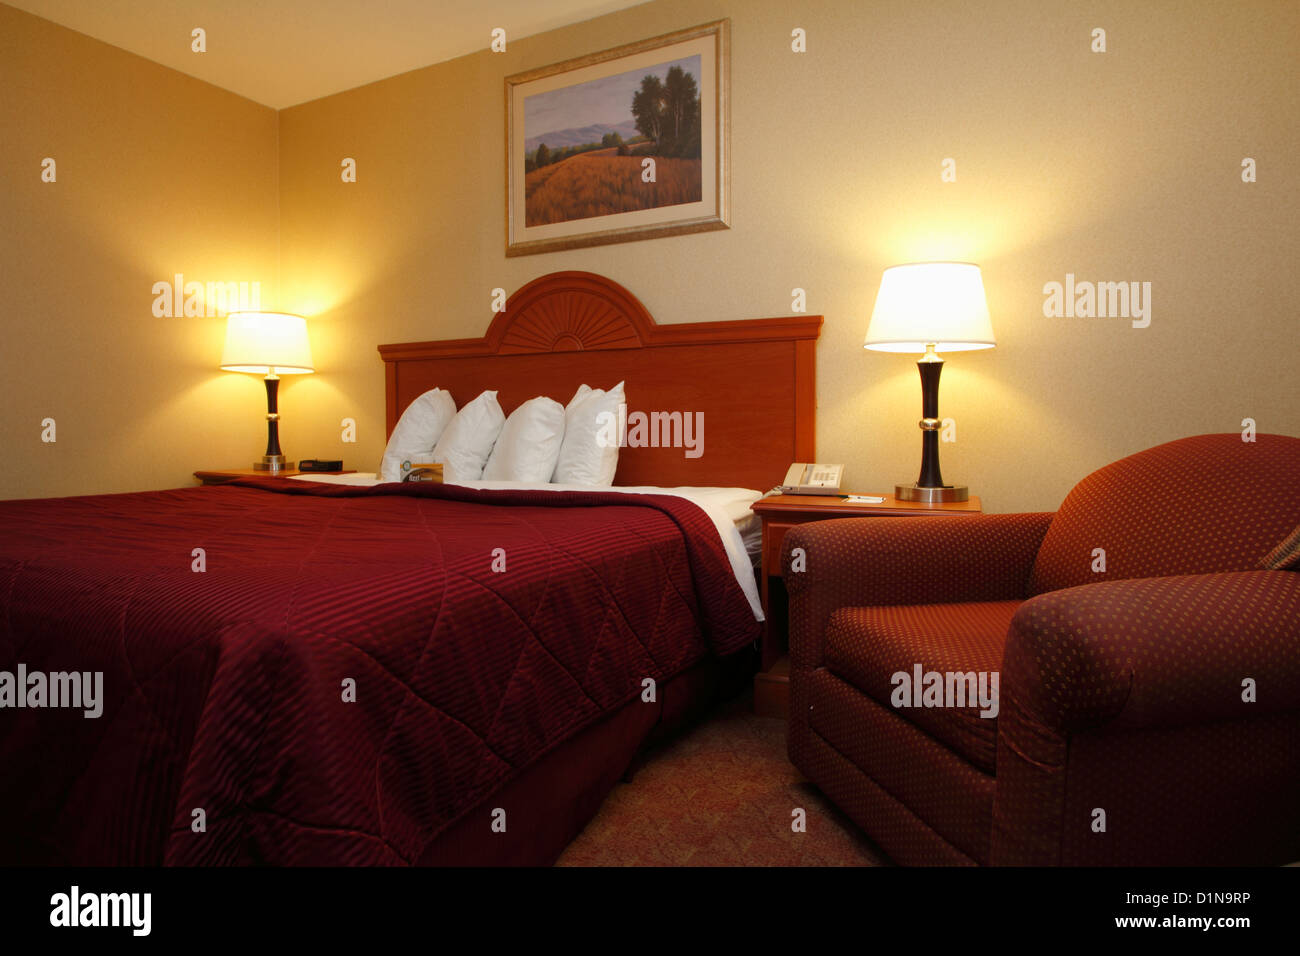 A typical North American hotel or motel room showing a king size bed and easy chair as well as lamps and four pillows Stock Photo